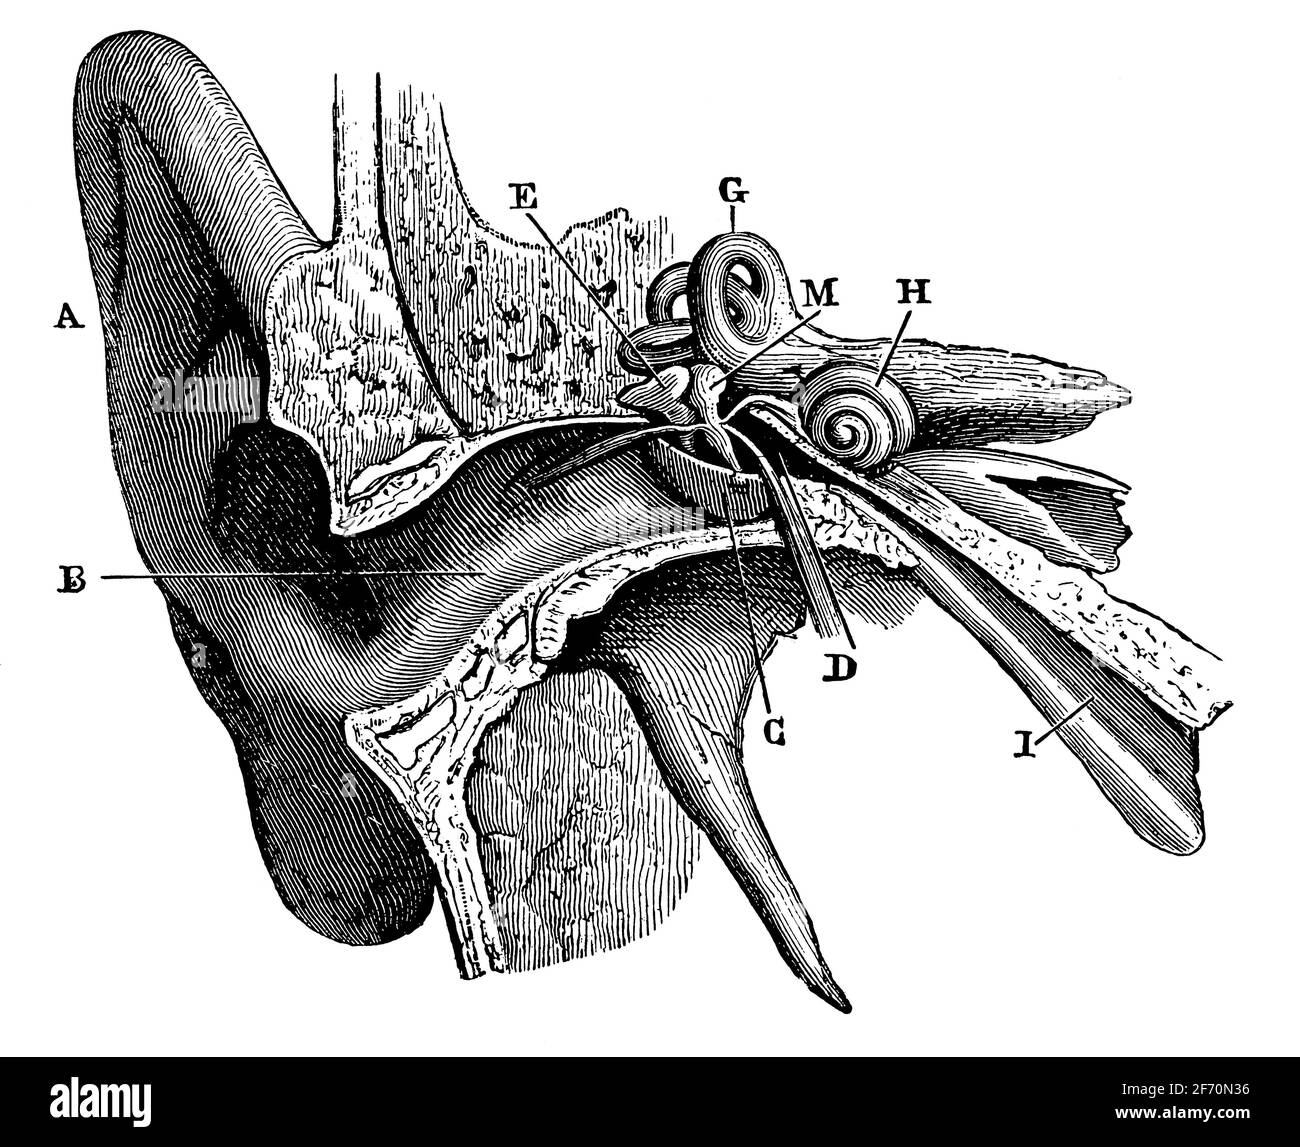 Human ear in cross section. Illustration of the 19th century. Germany. White background. Stock Photo